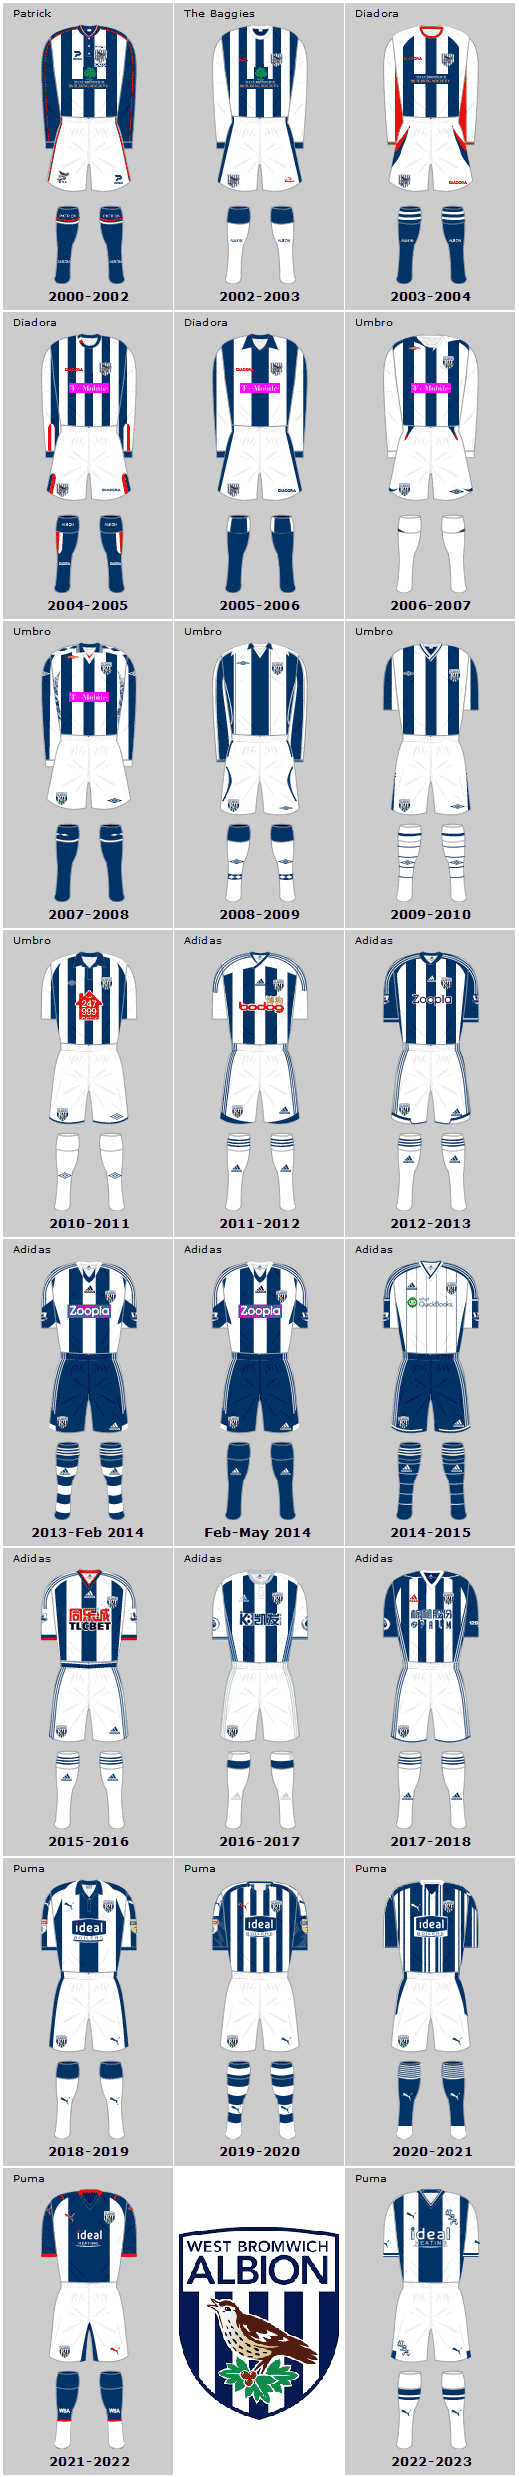 West Bromwich Albion 21st Century Home Playing Kits